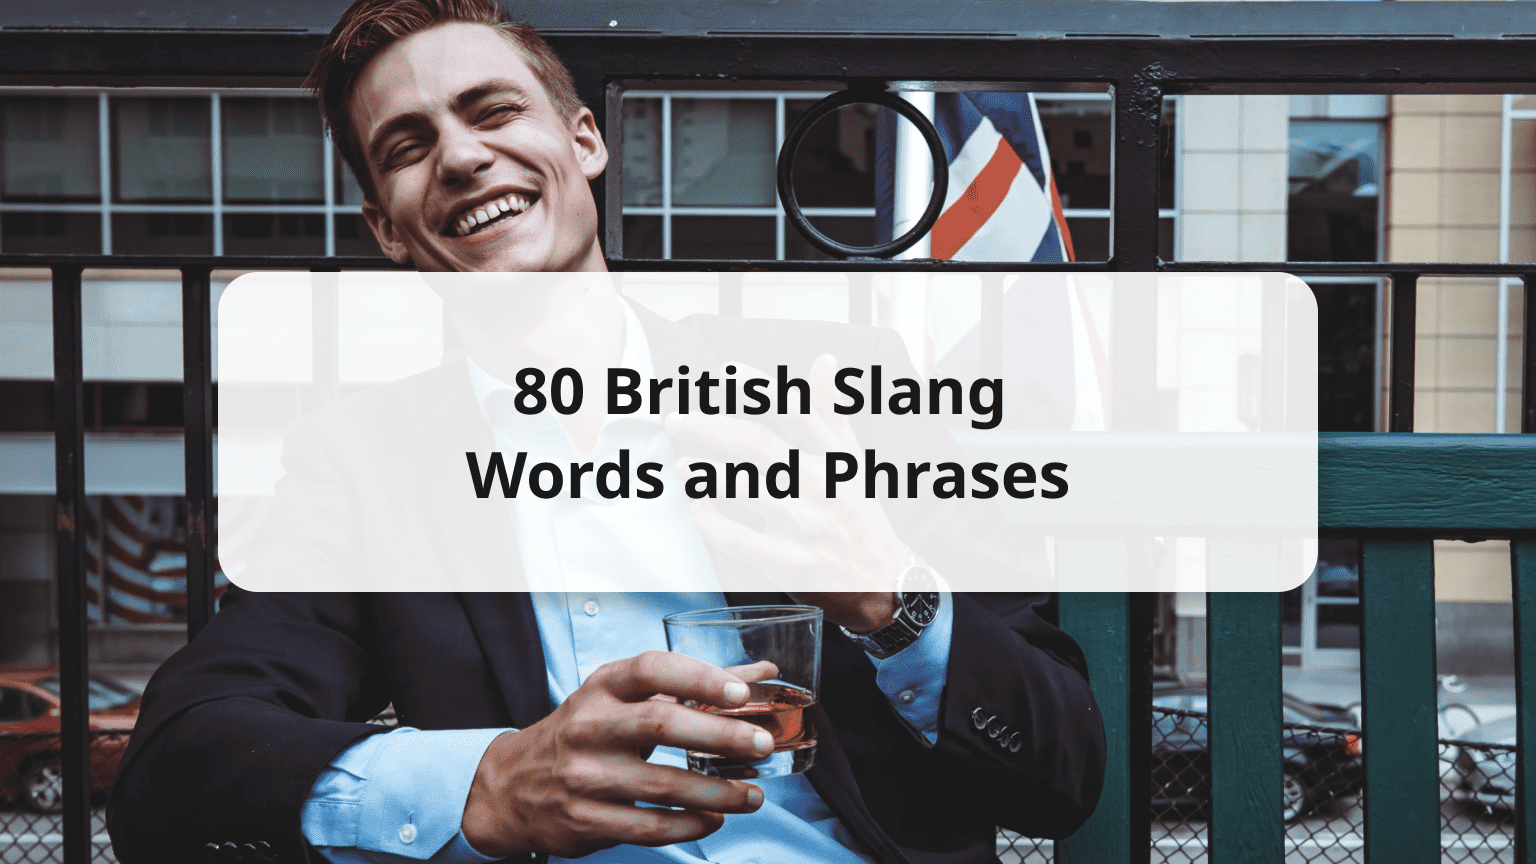 80 British Slang Words and Phrases & Their Meanings